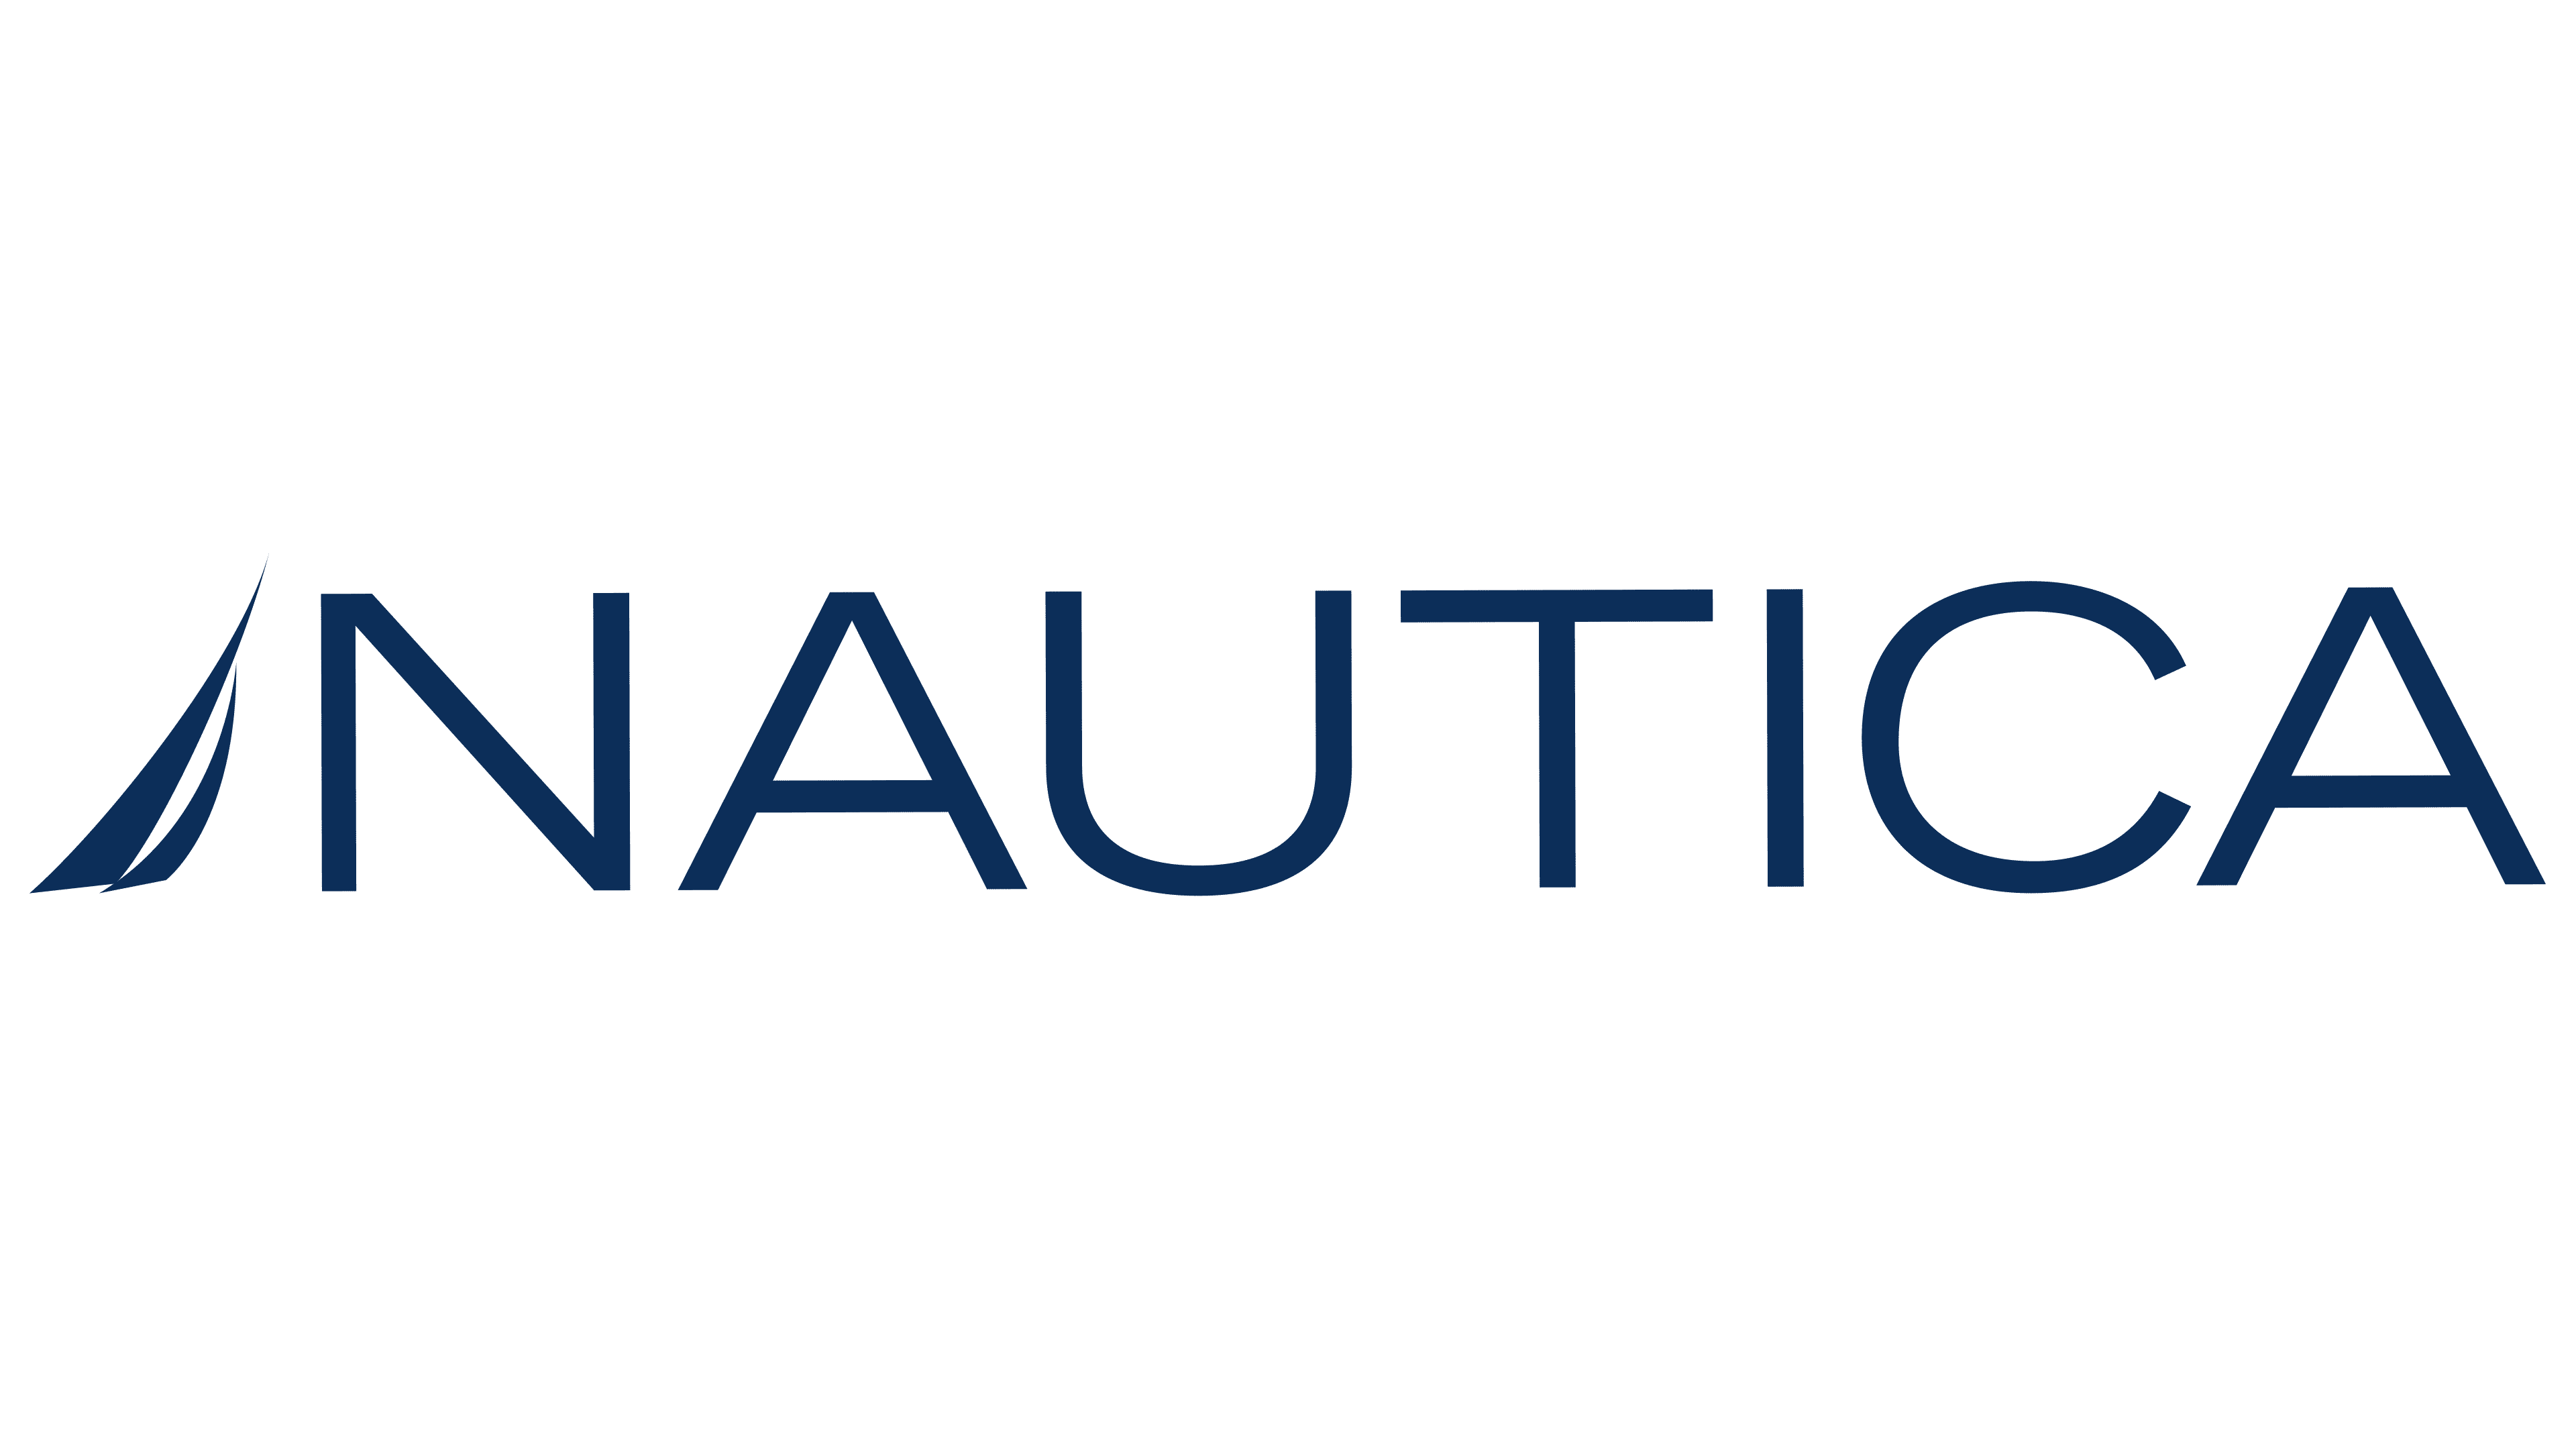 Nautica Logo, symbol, meaning, history, PNG, brand